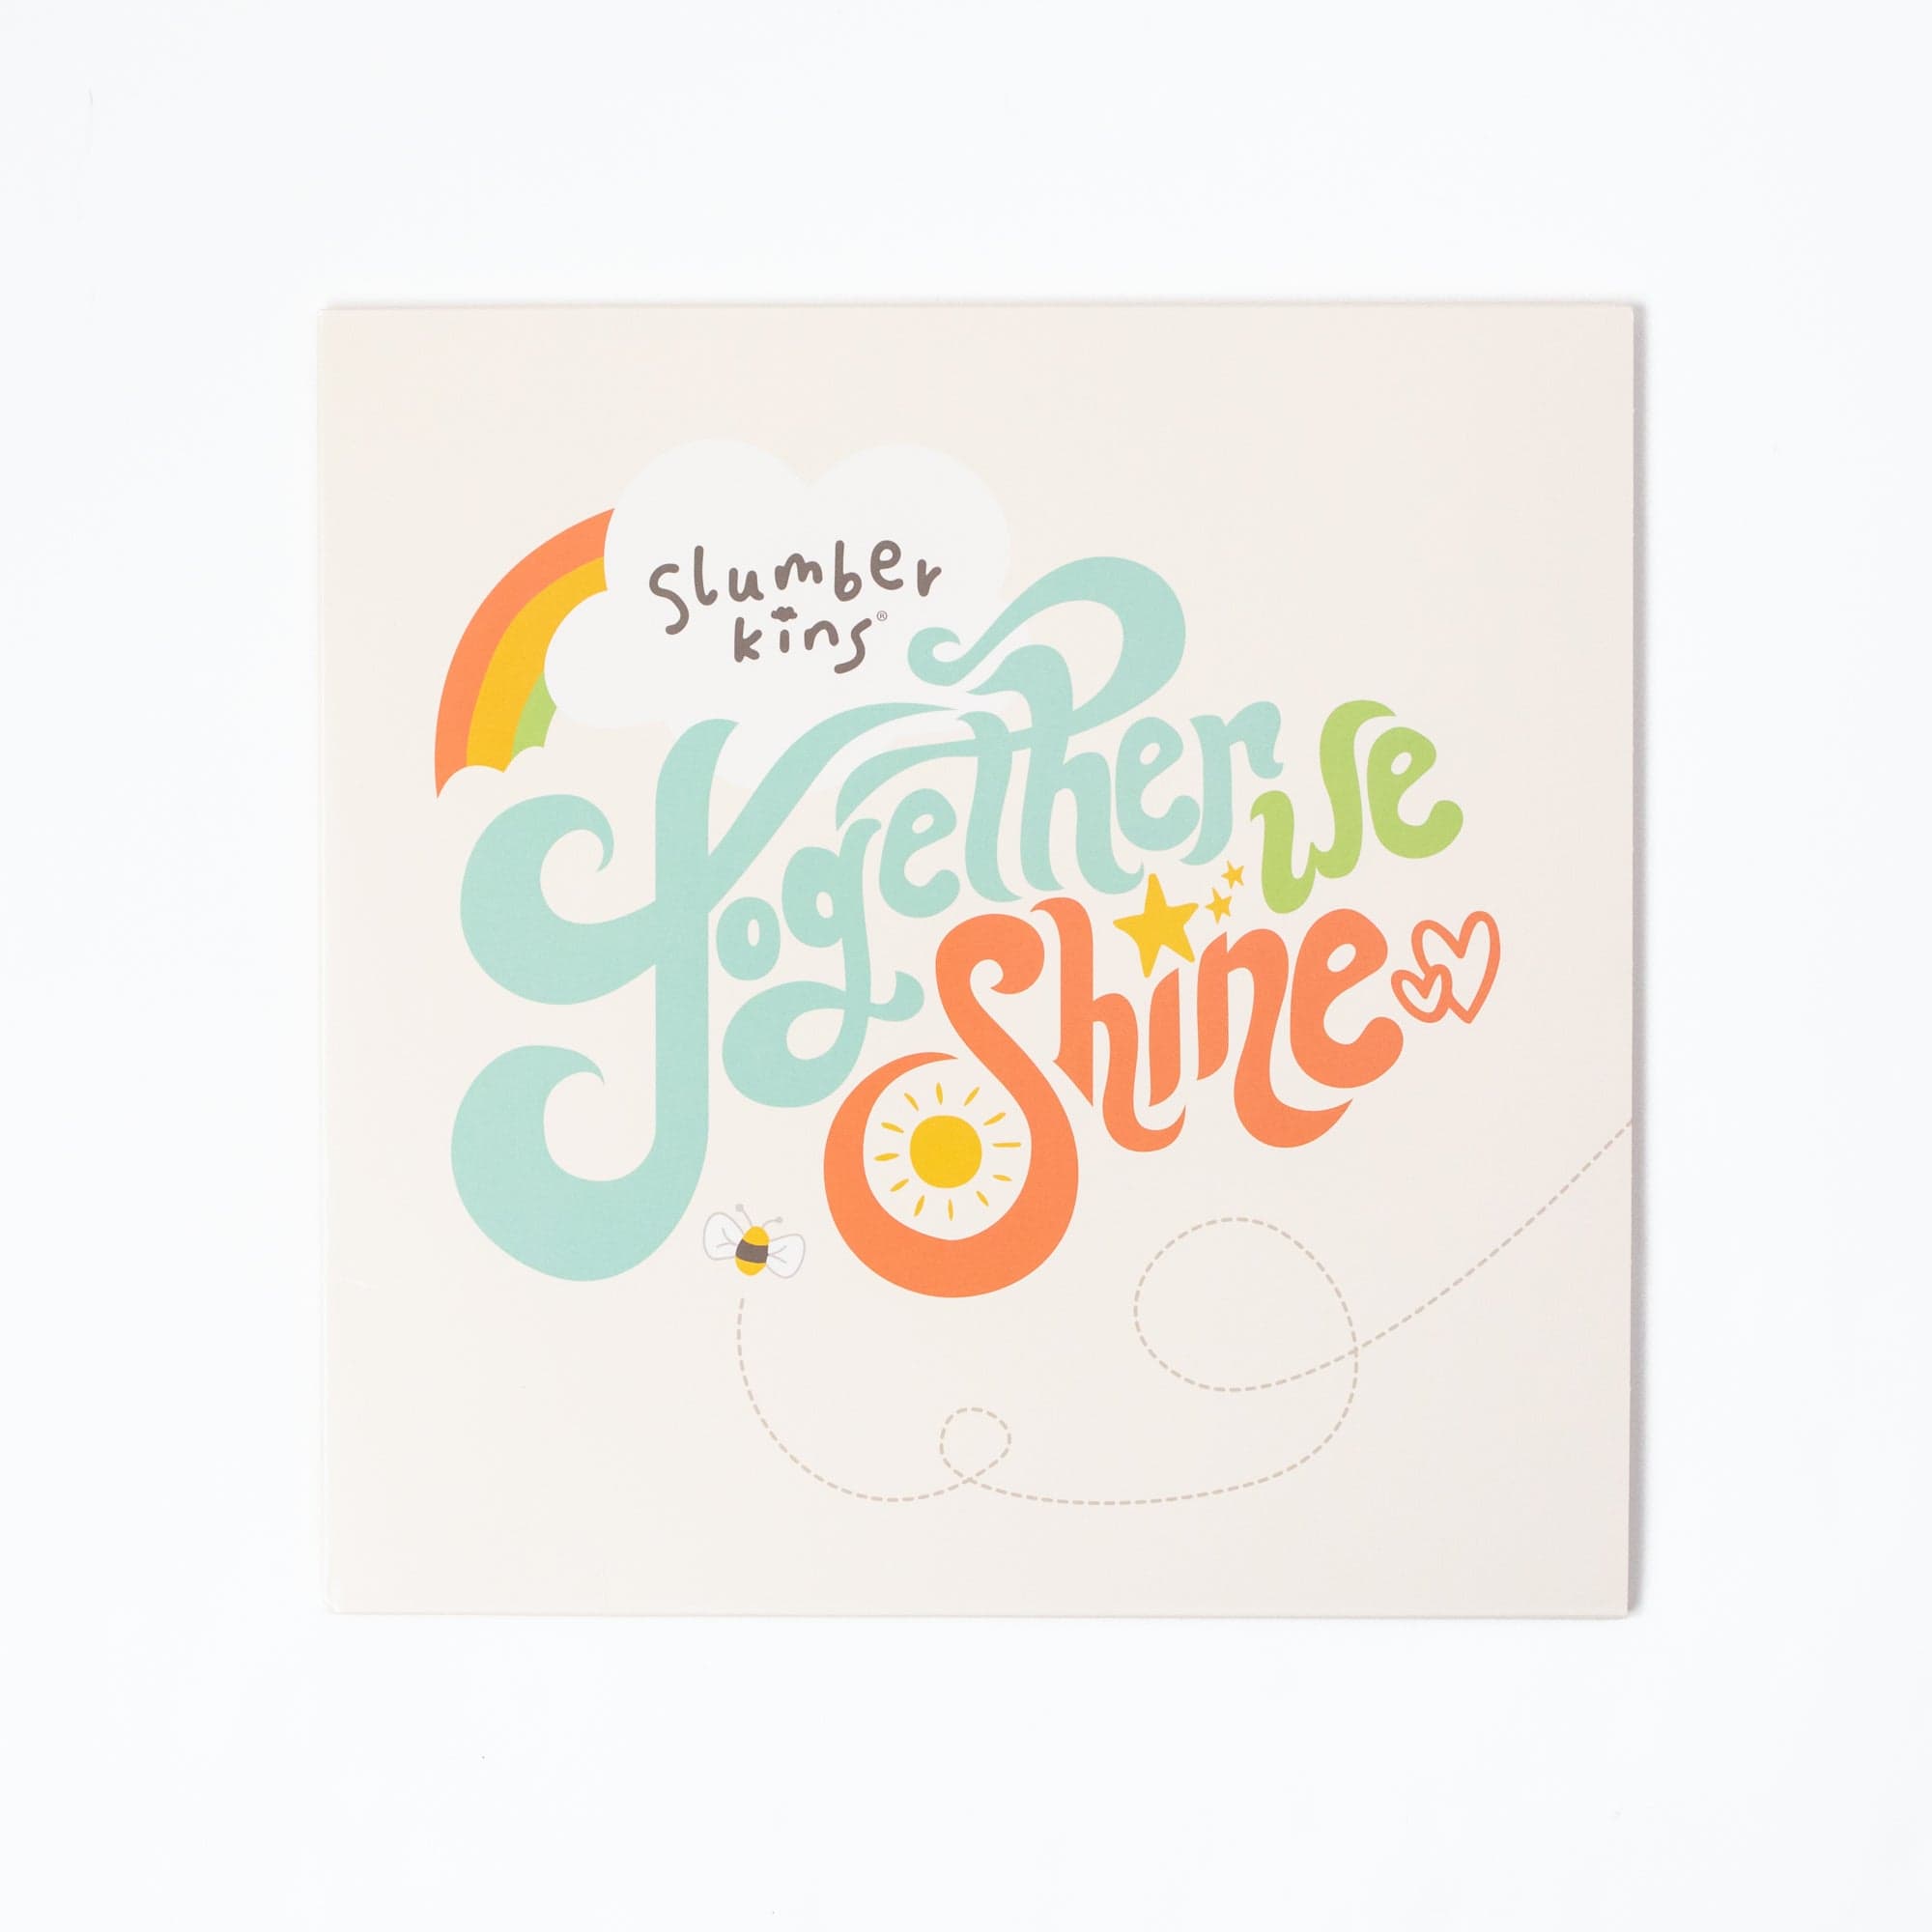 Sunshine Yellow Together We Shine, Vol. 1 Vinyl Record - View Product